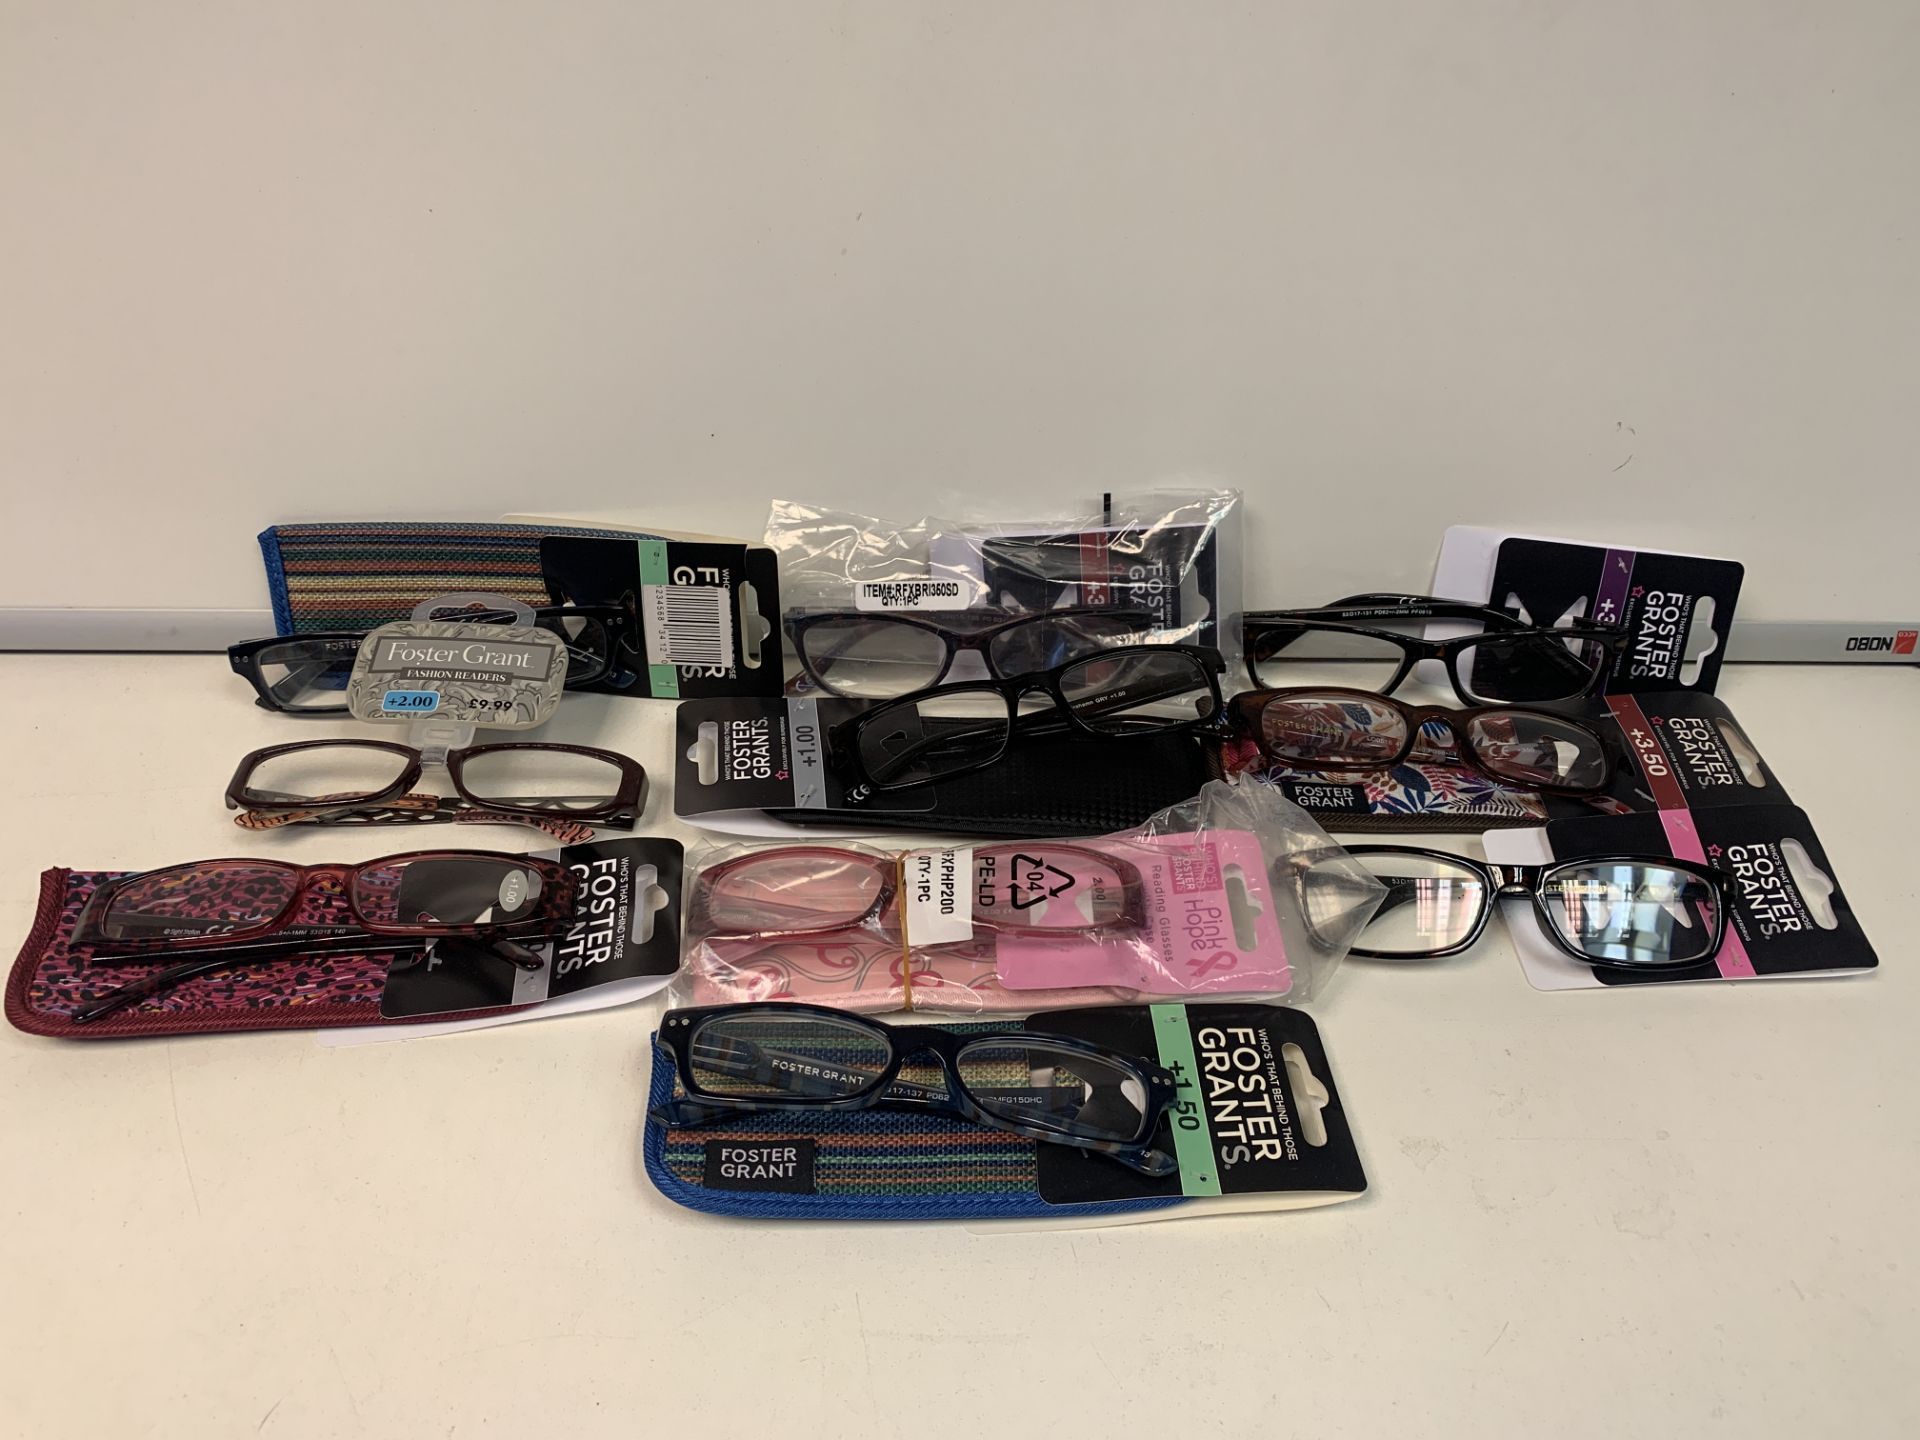 40 X BRAND NEW FOSTER GRANT GLASSES/SUNGLASSES IN VARIOUS STYLES RRP £12-40 EACH